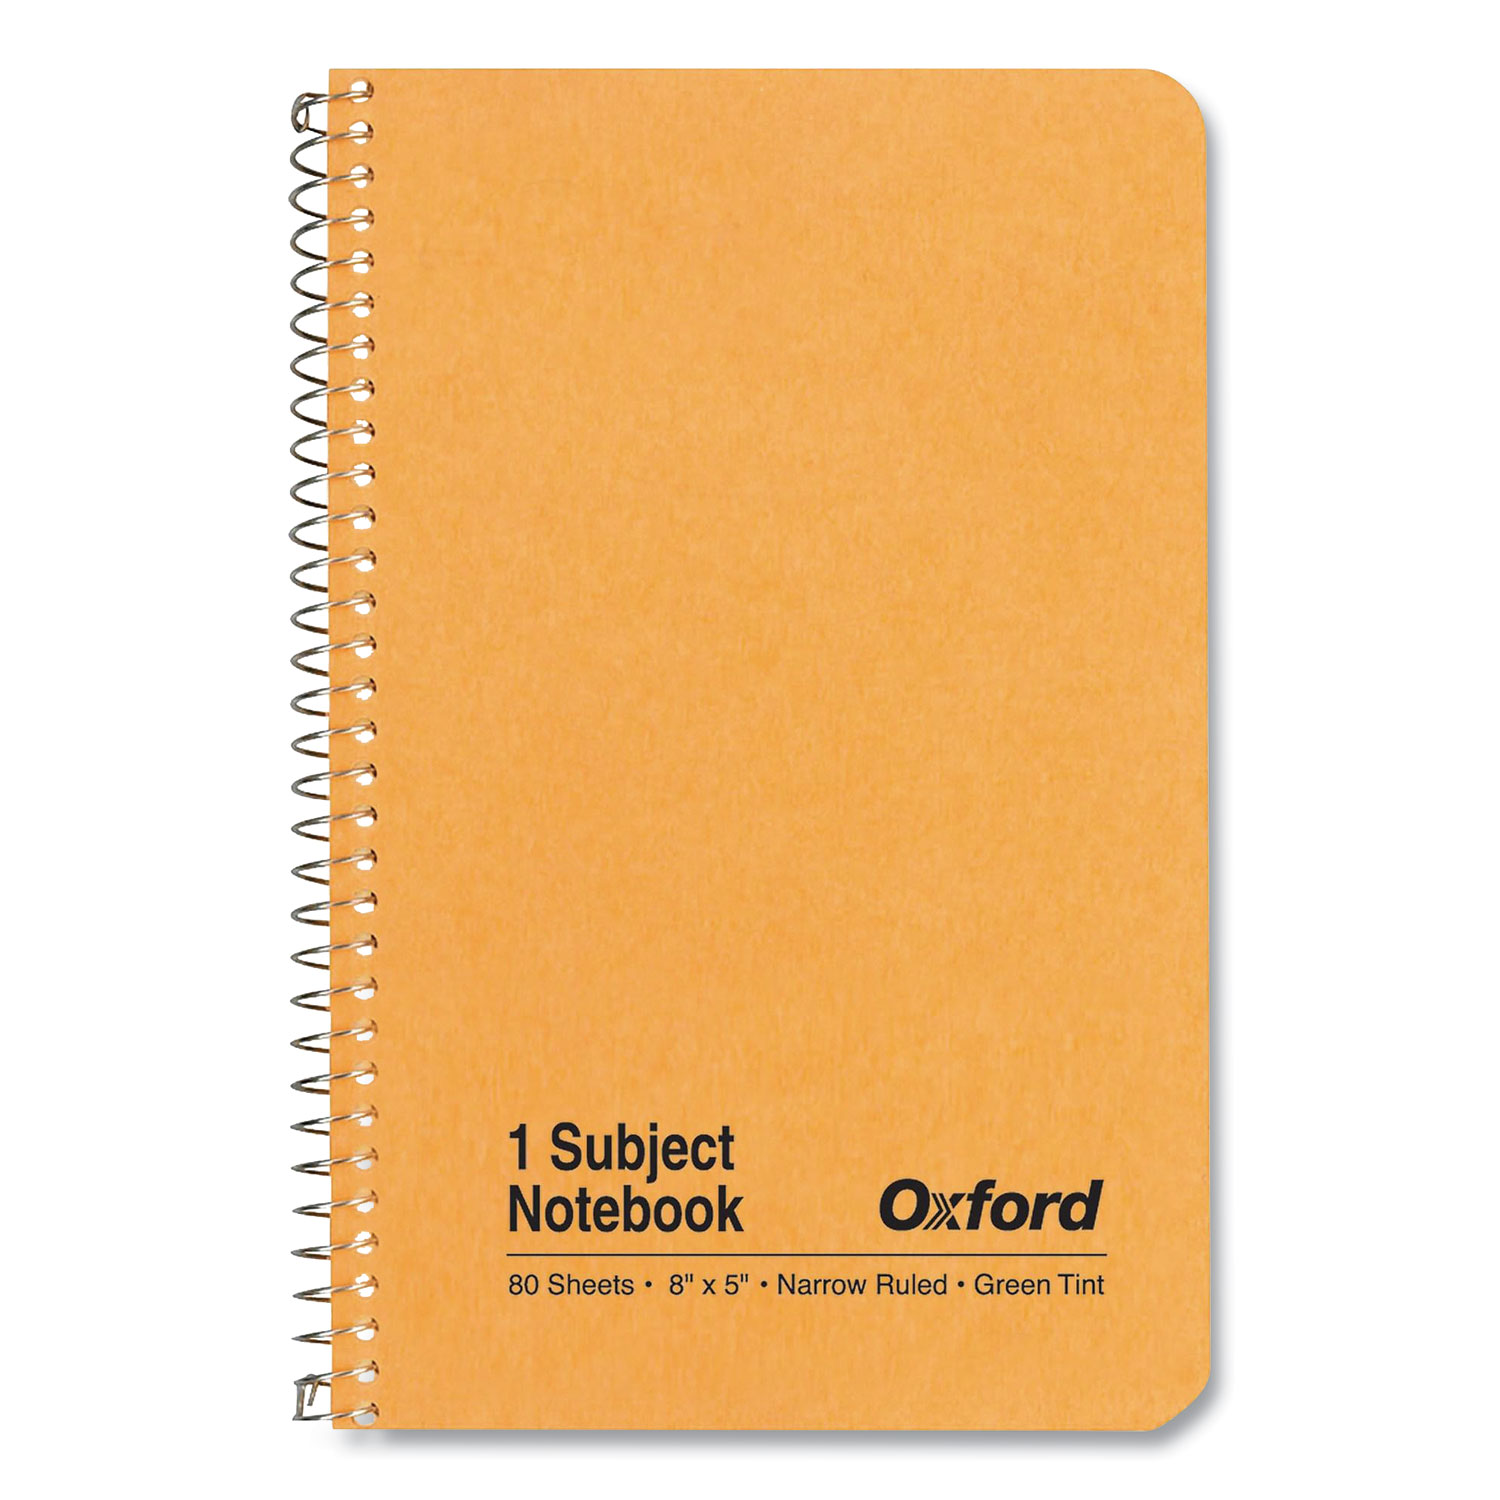  Oxford 25-401R One-Subject Notebook, Narrow Rule, Kraft Cover, 5 x 8, 80 Green Tint Sheets (OXF801068) 